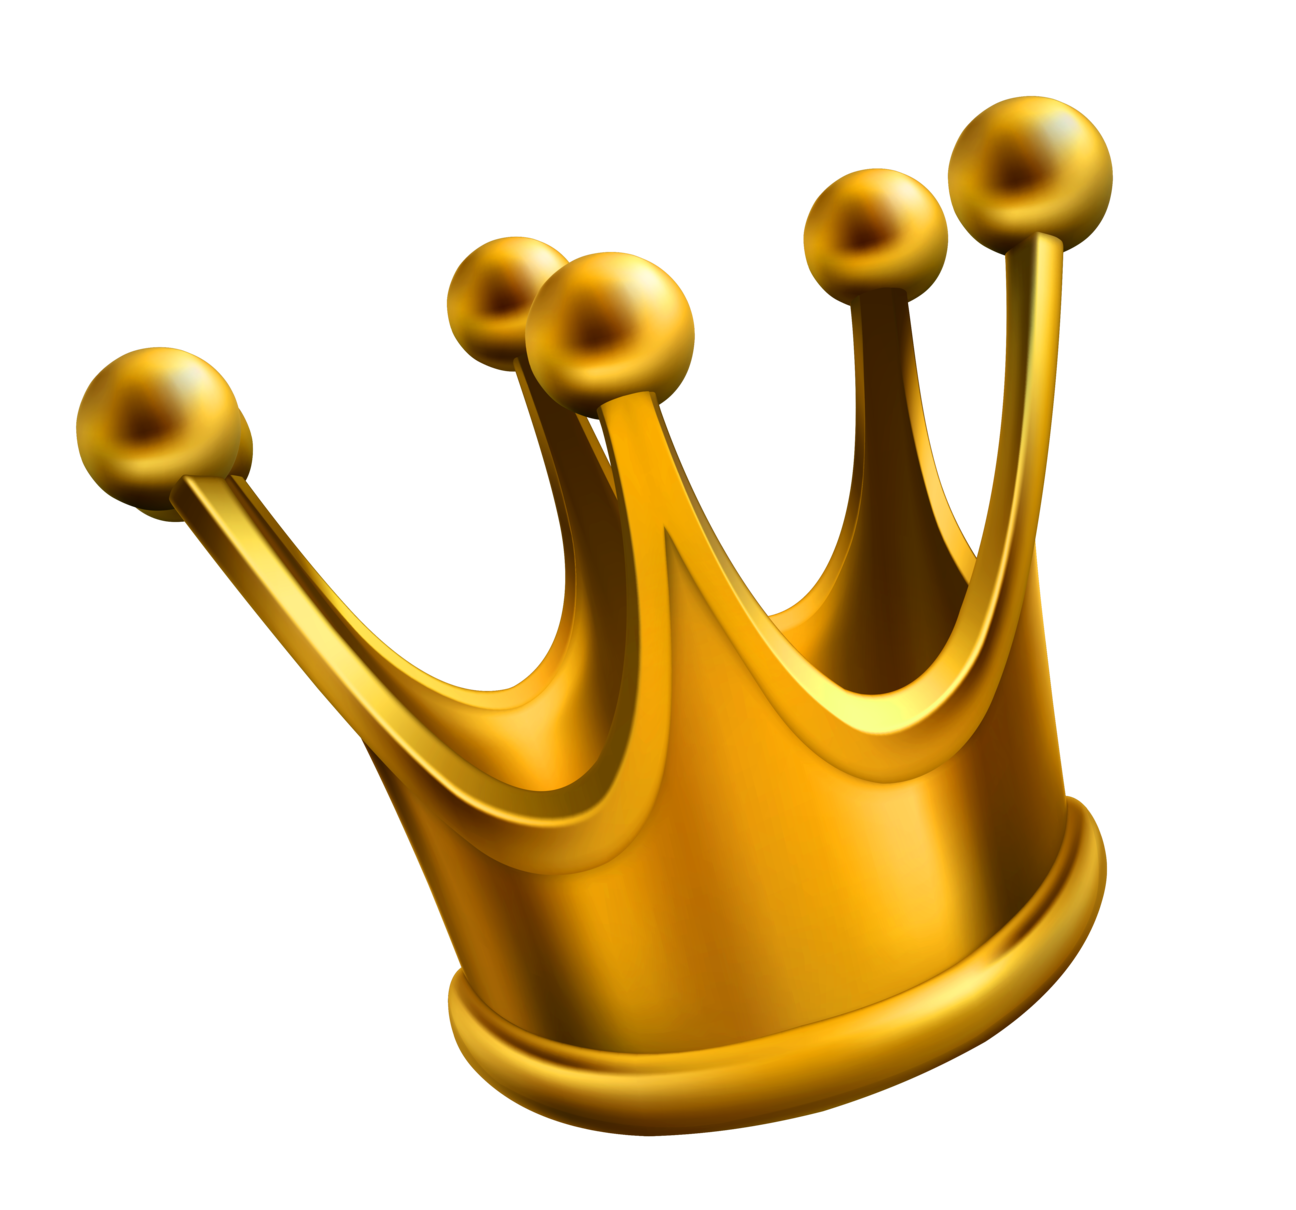 Simple Golden Crown Png Clipart - Kings Crown, Transparent background PNG HD thumbnail